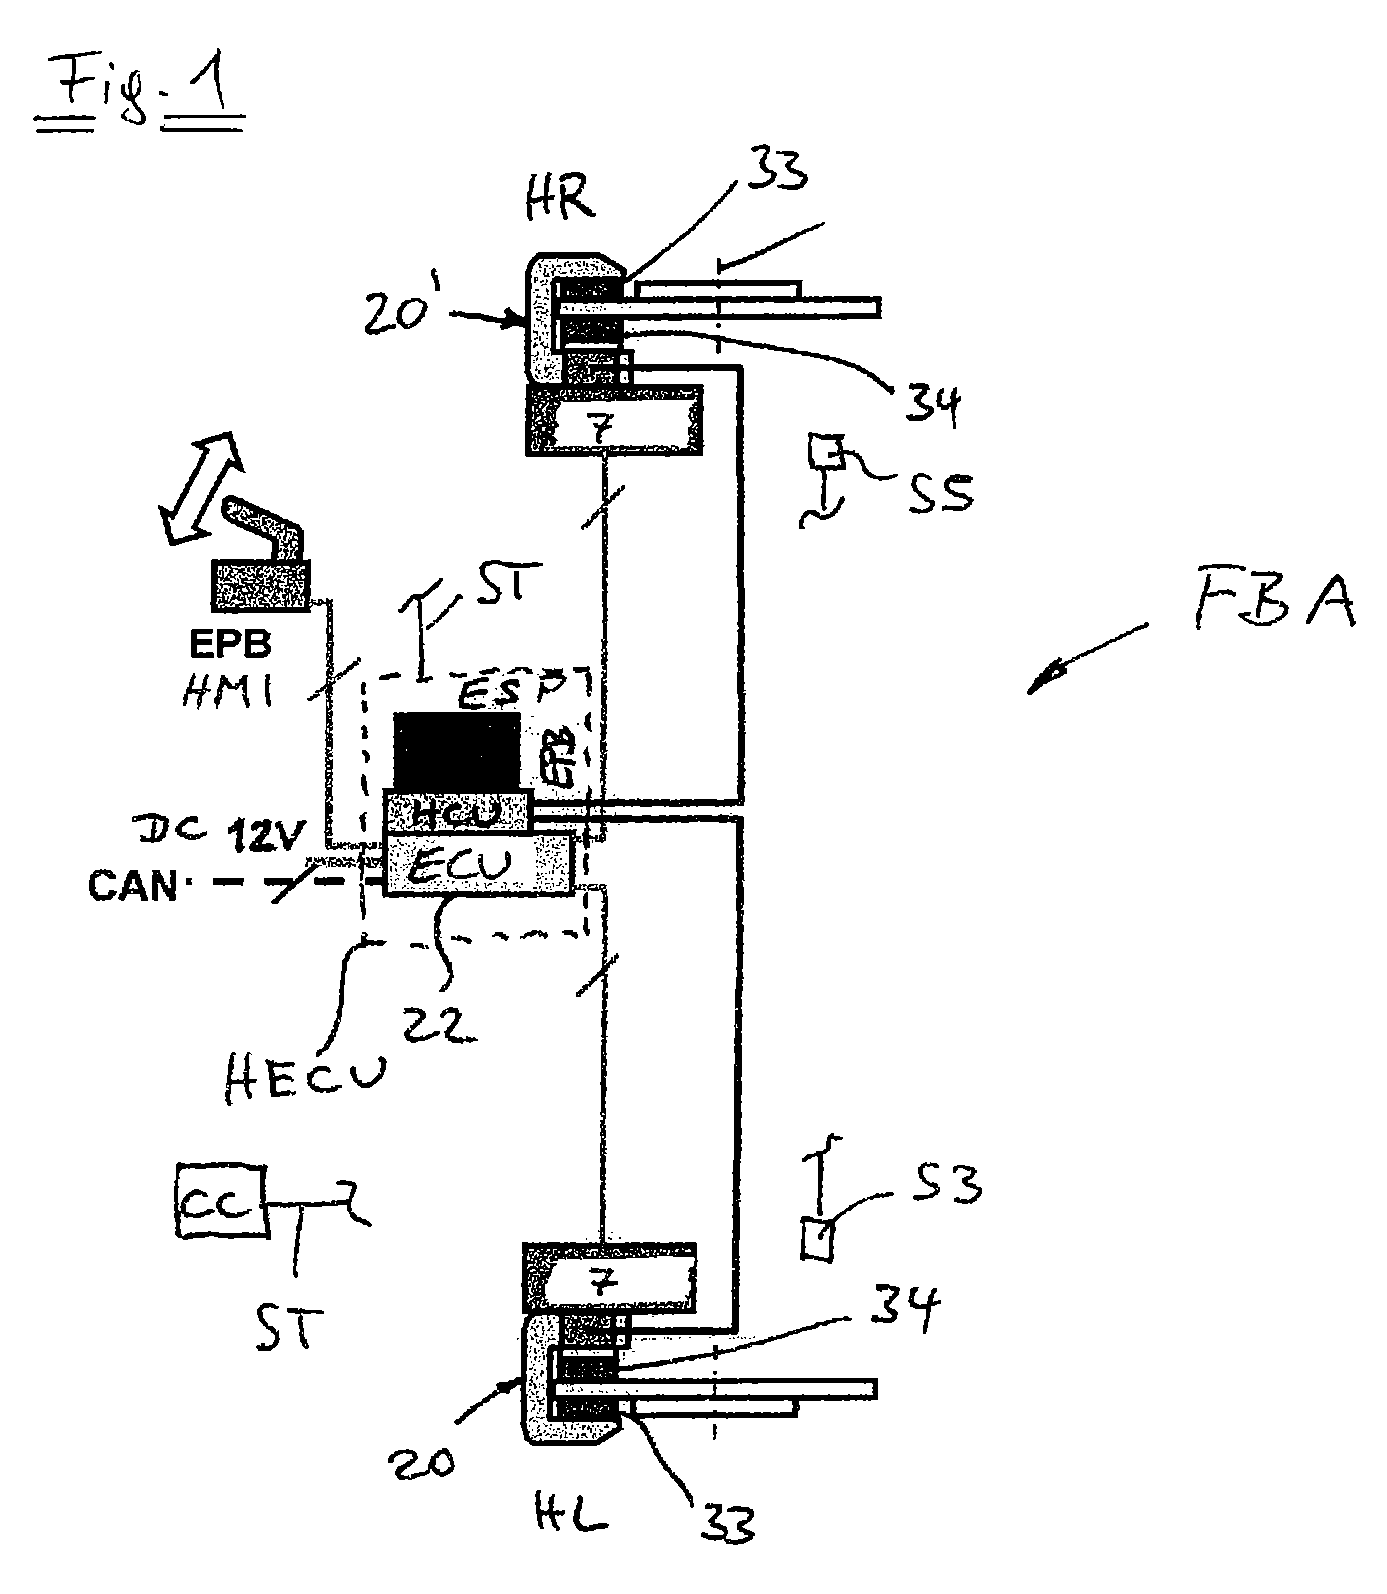 Motor vehicle braking system having a hydraulically actuated service braking system and an electromechanically actuated braking system